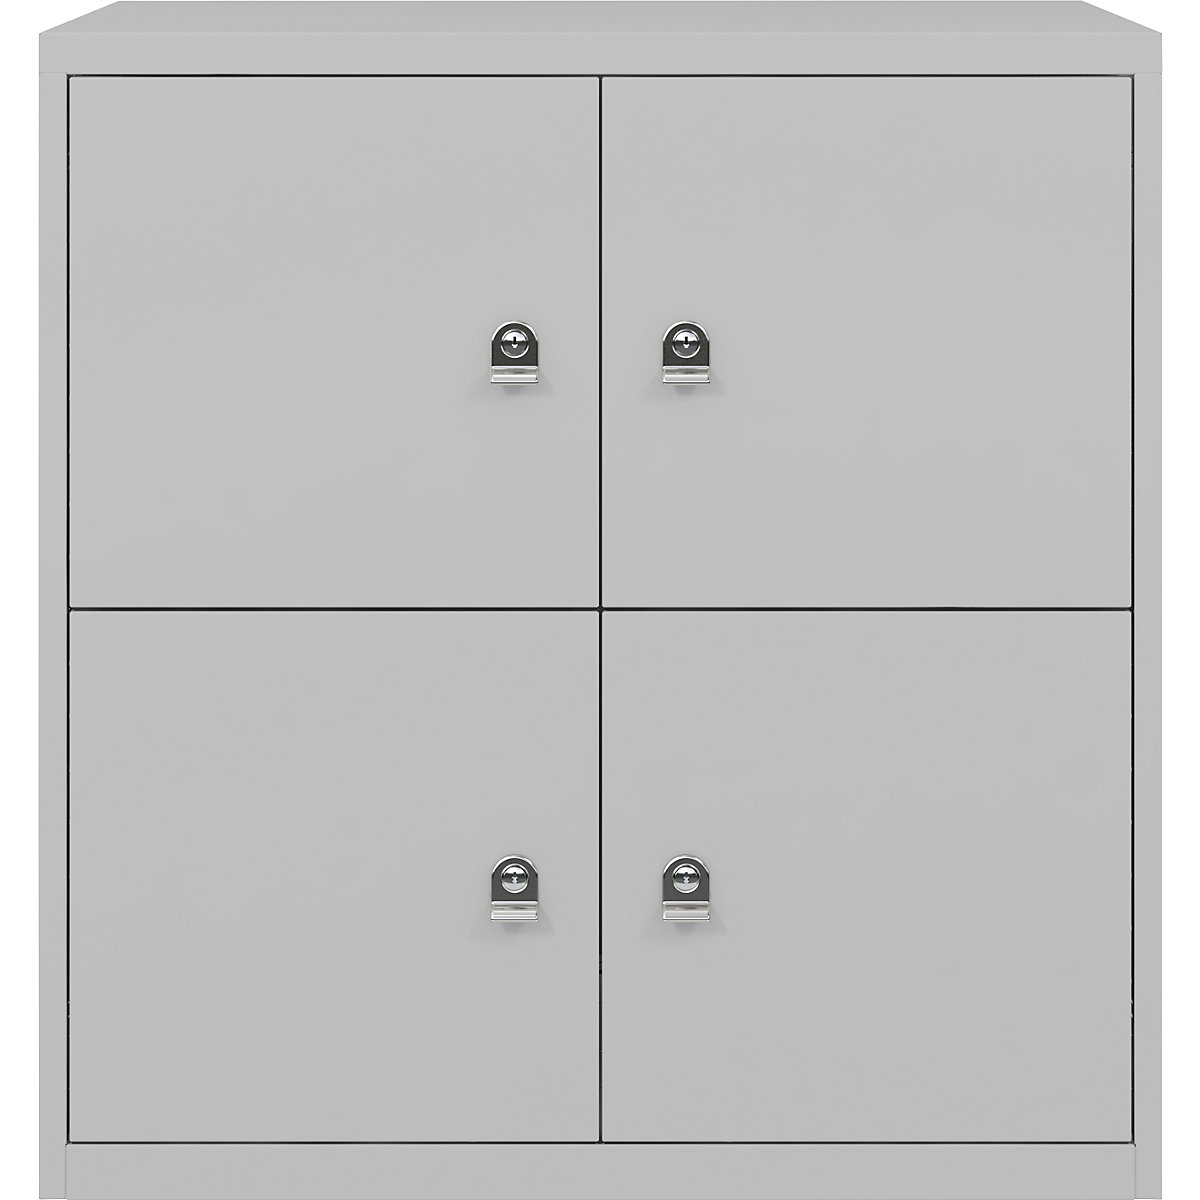 LateralFile™ lodge – BISLEY, with 4 lockable compartments, height 375 mm each, goose grey